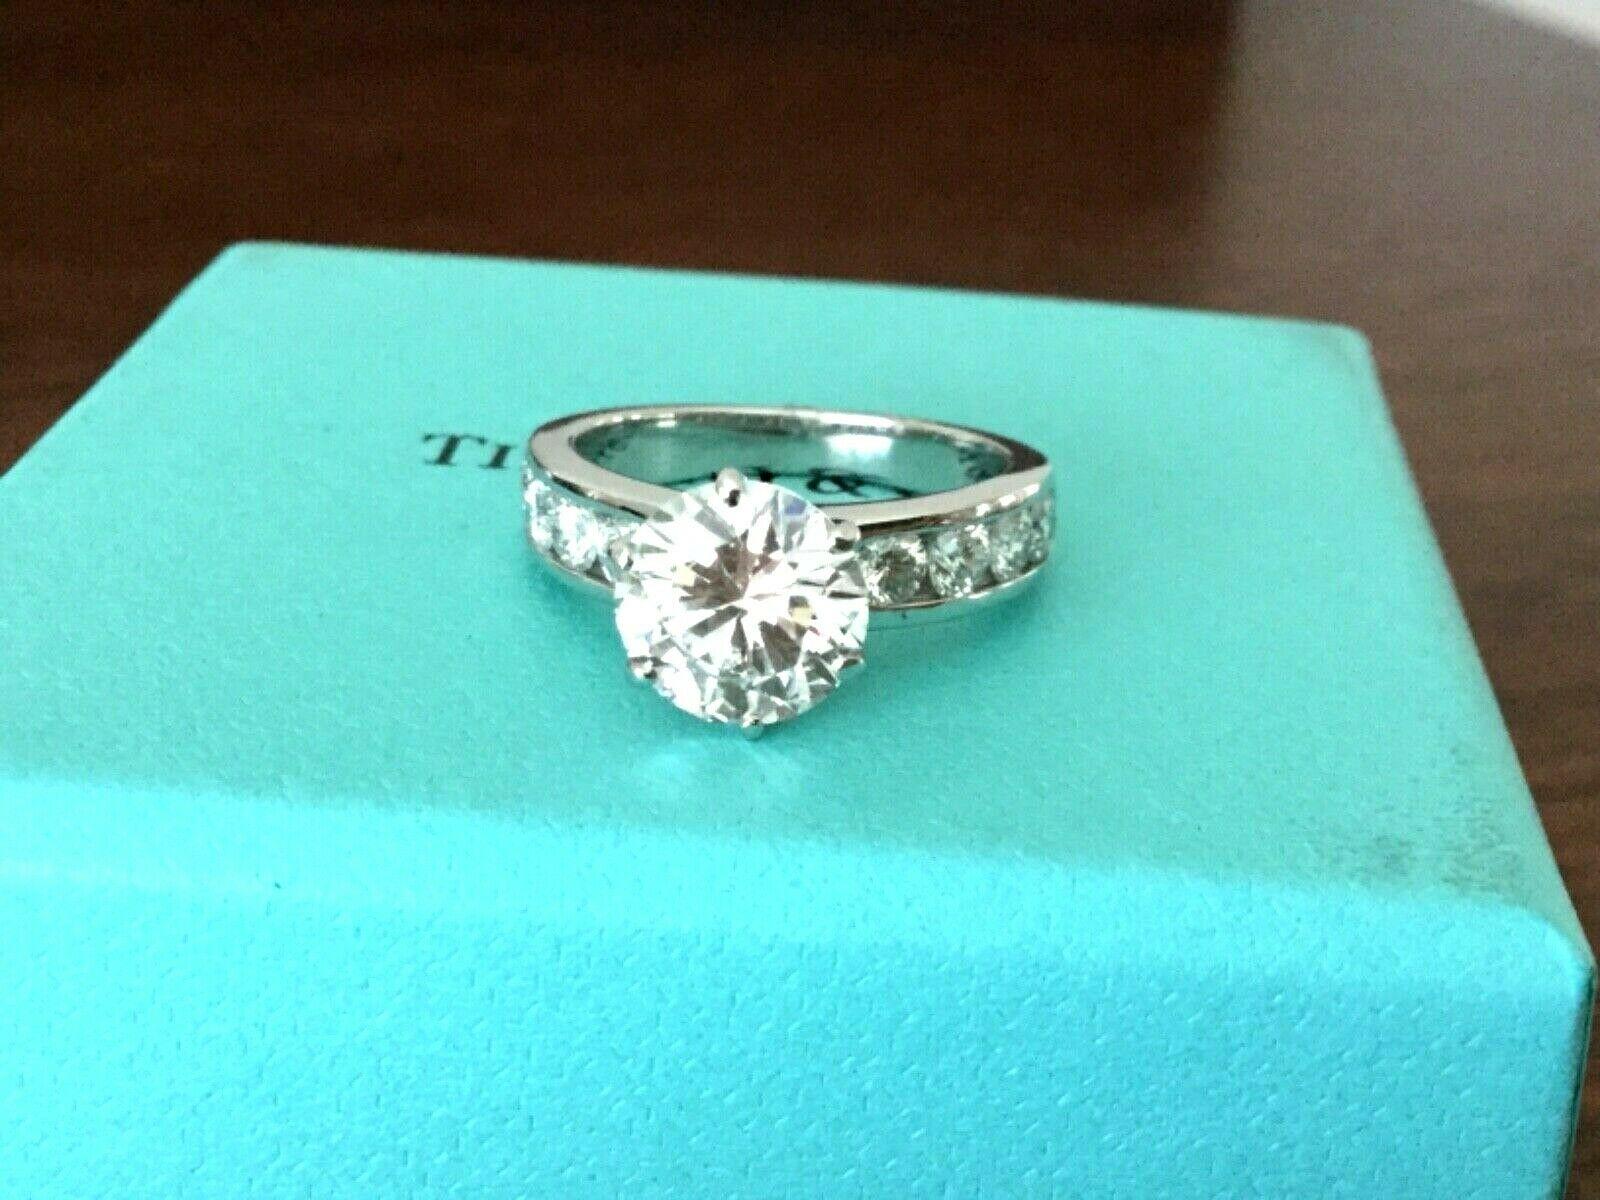 Being offered for your consideration is a like new classic Tiffany & Co Platinum and Diamond 2.14 carat natural Round engagement ring set in the classic channel set diamond band (TOTAL CARAT WEIGHT IS 2.50 carats)..  This ring was hardly worn and